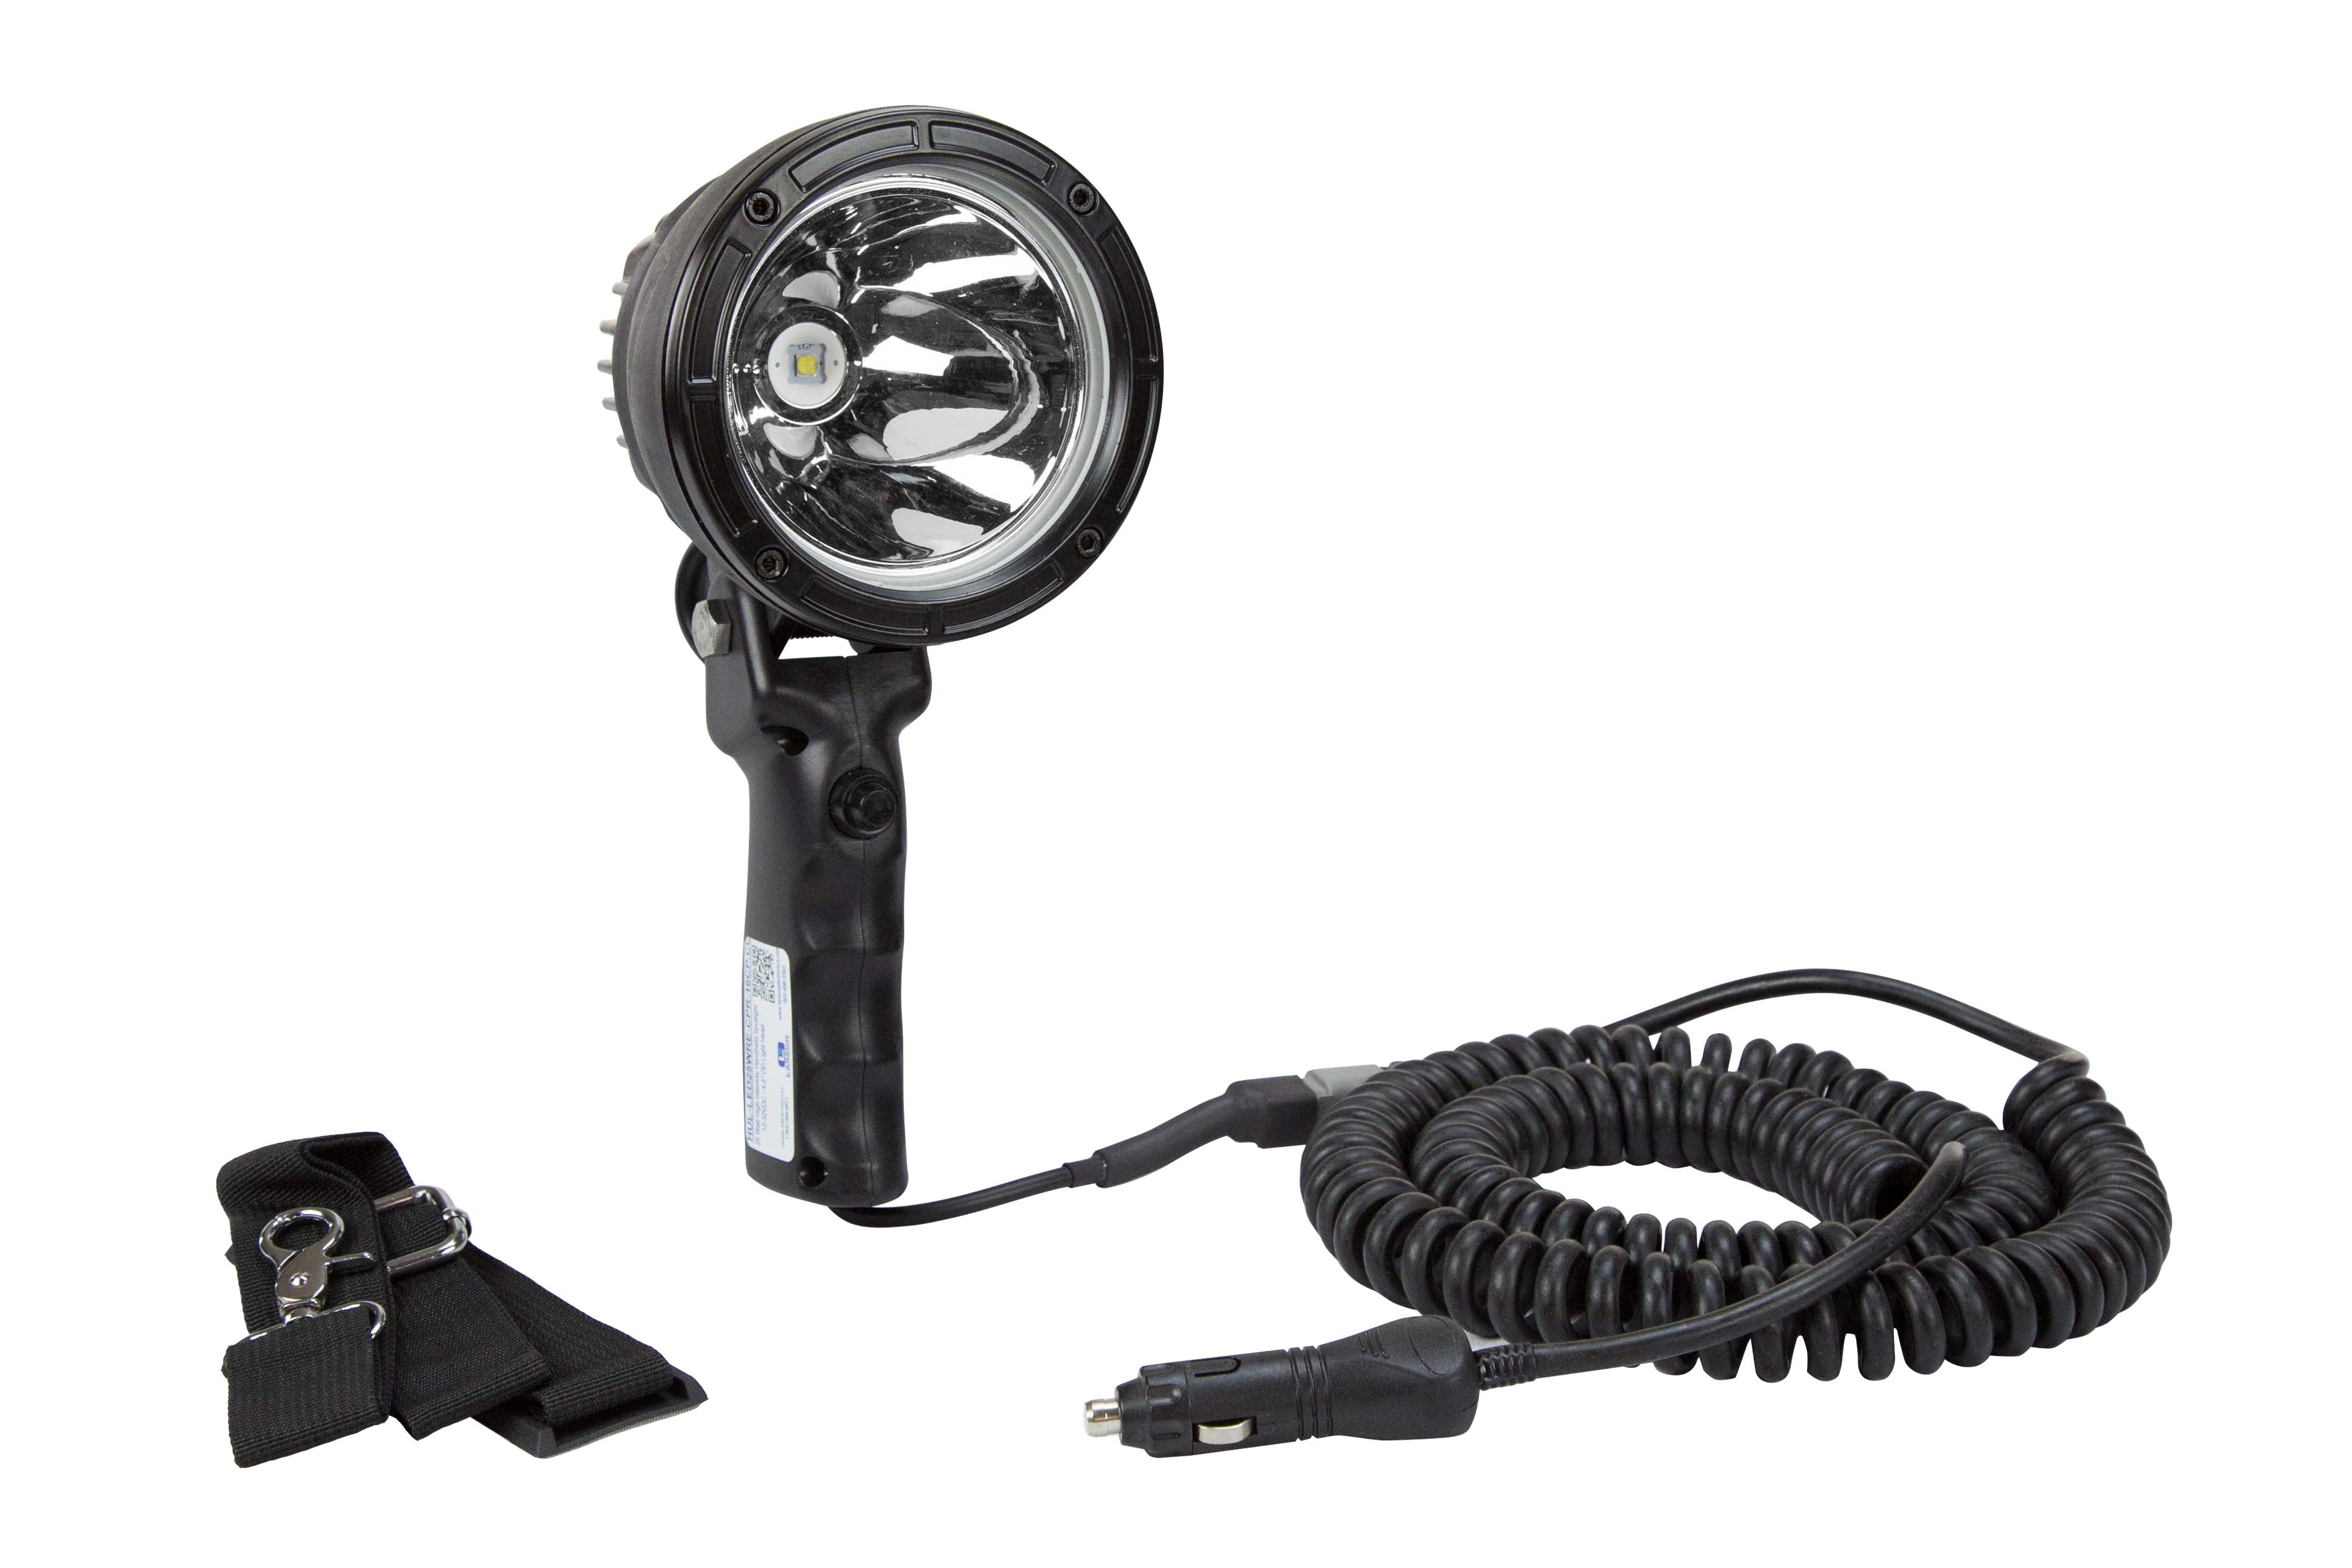 Six Million Candlepower LED Spotlight Donated to the Wounded Warrior Anglers